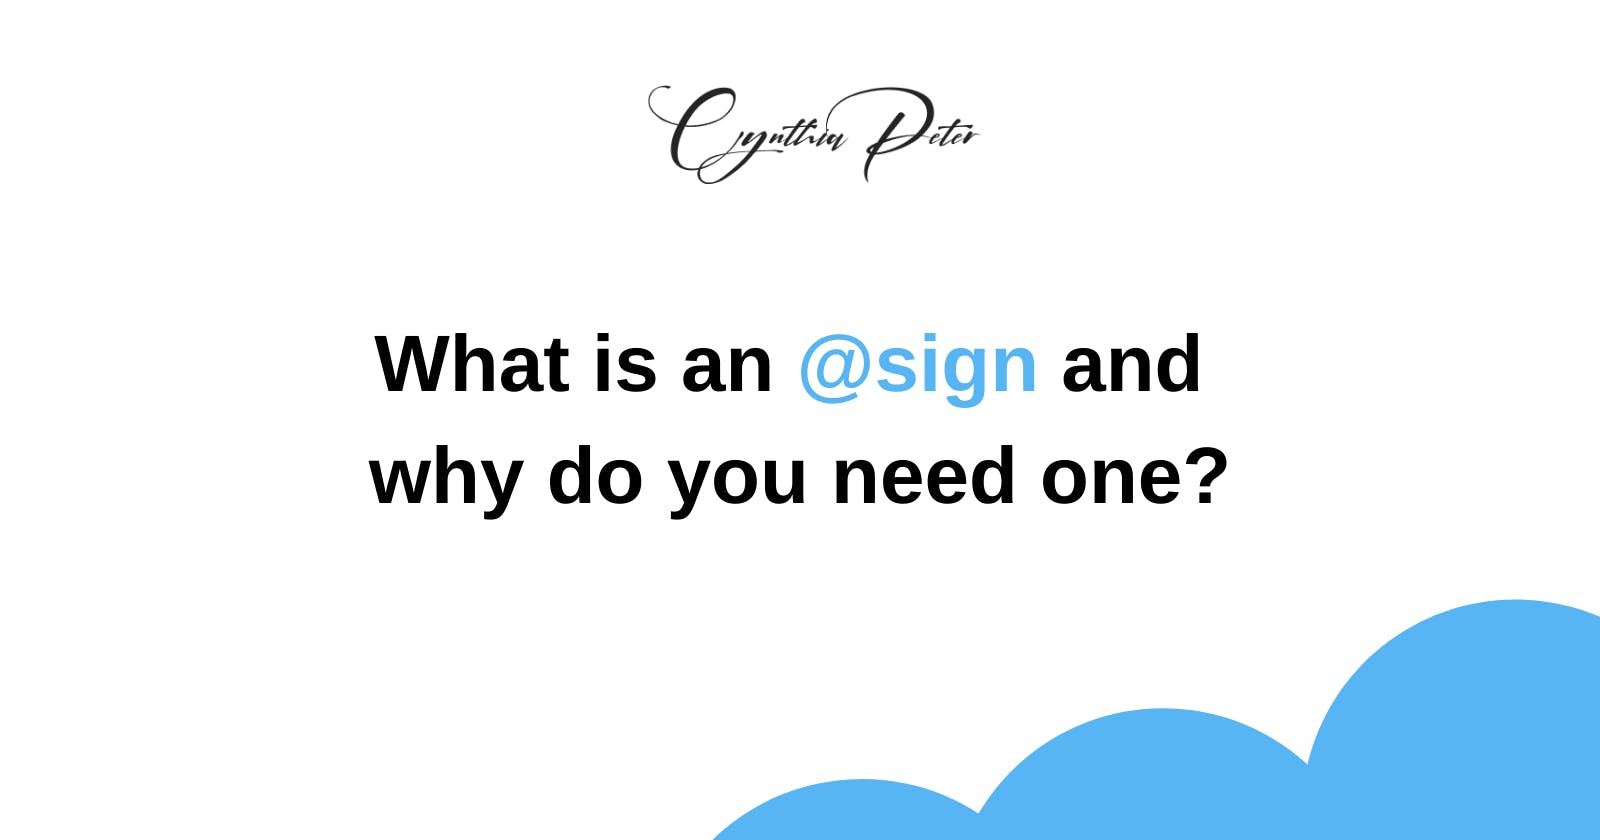 What is an atsign and why you need one?